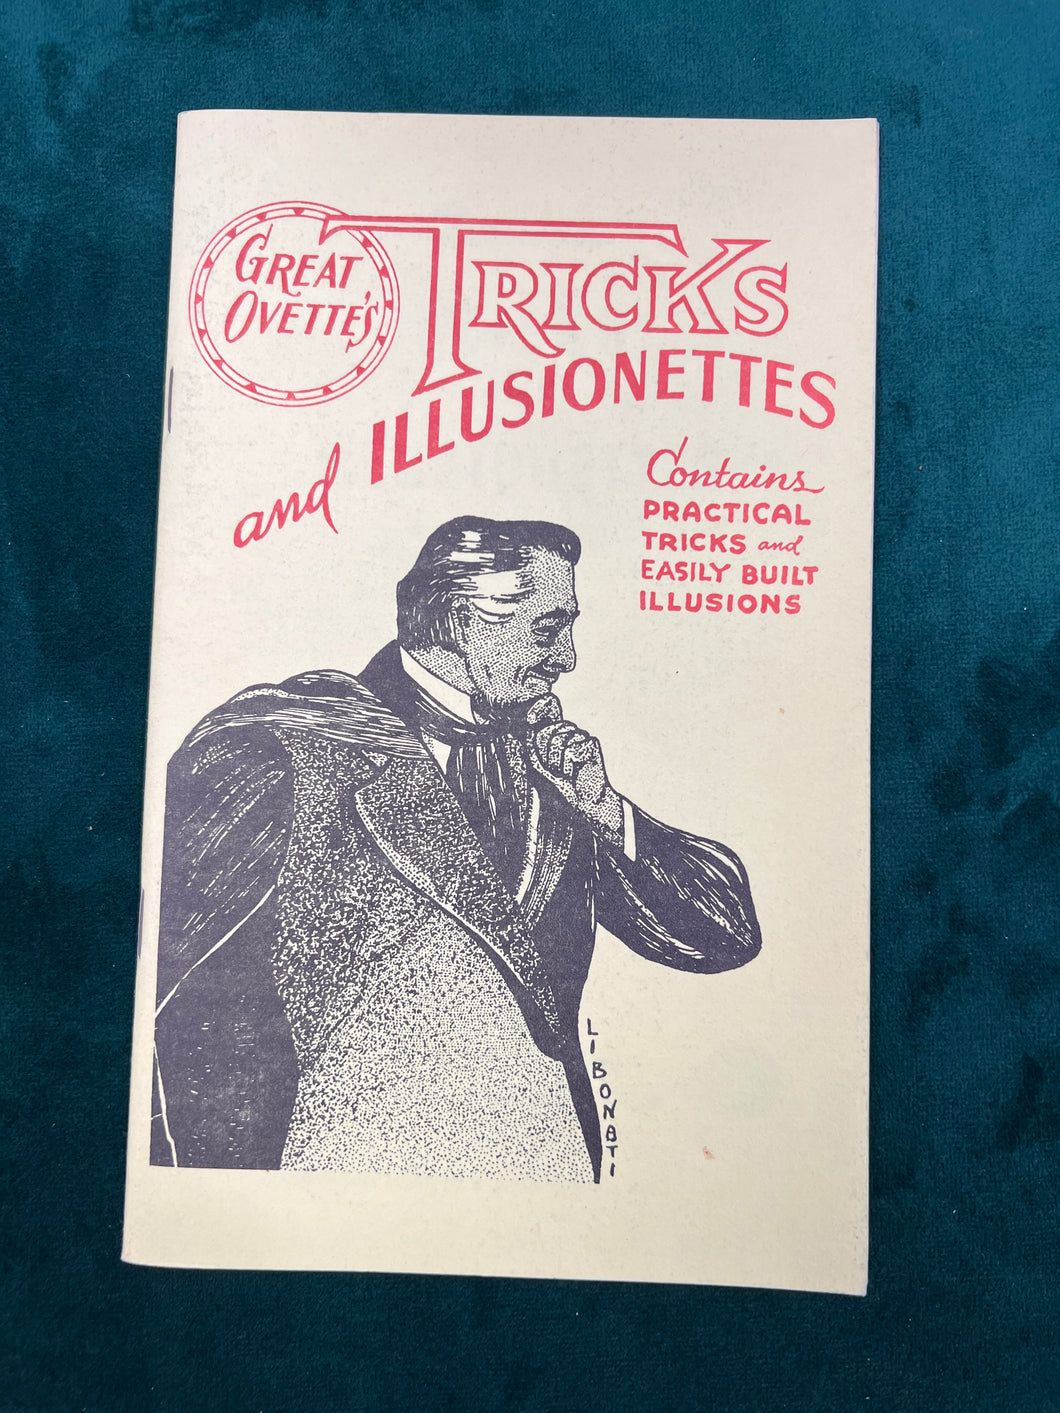 Tricks and Illusionettes By the Great Ovette